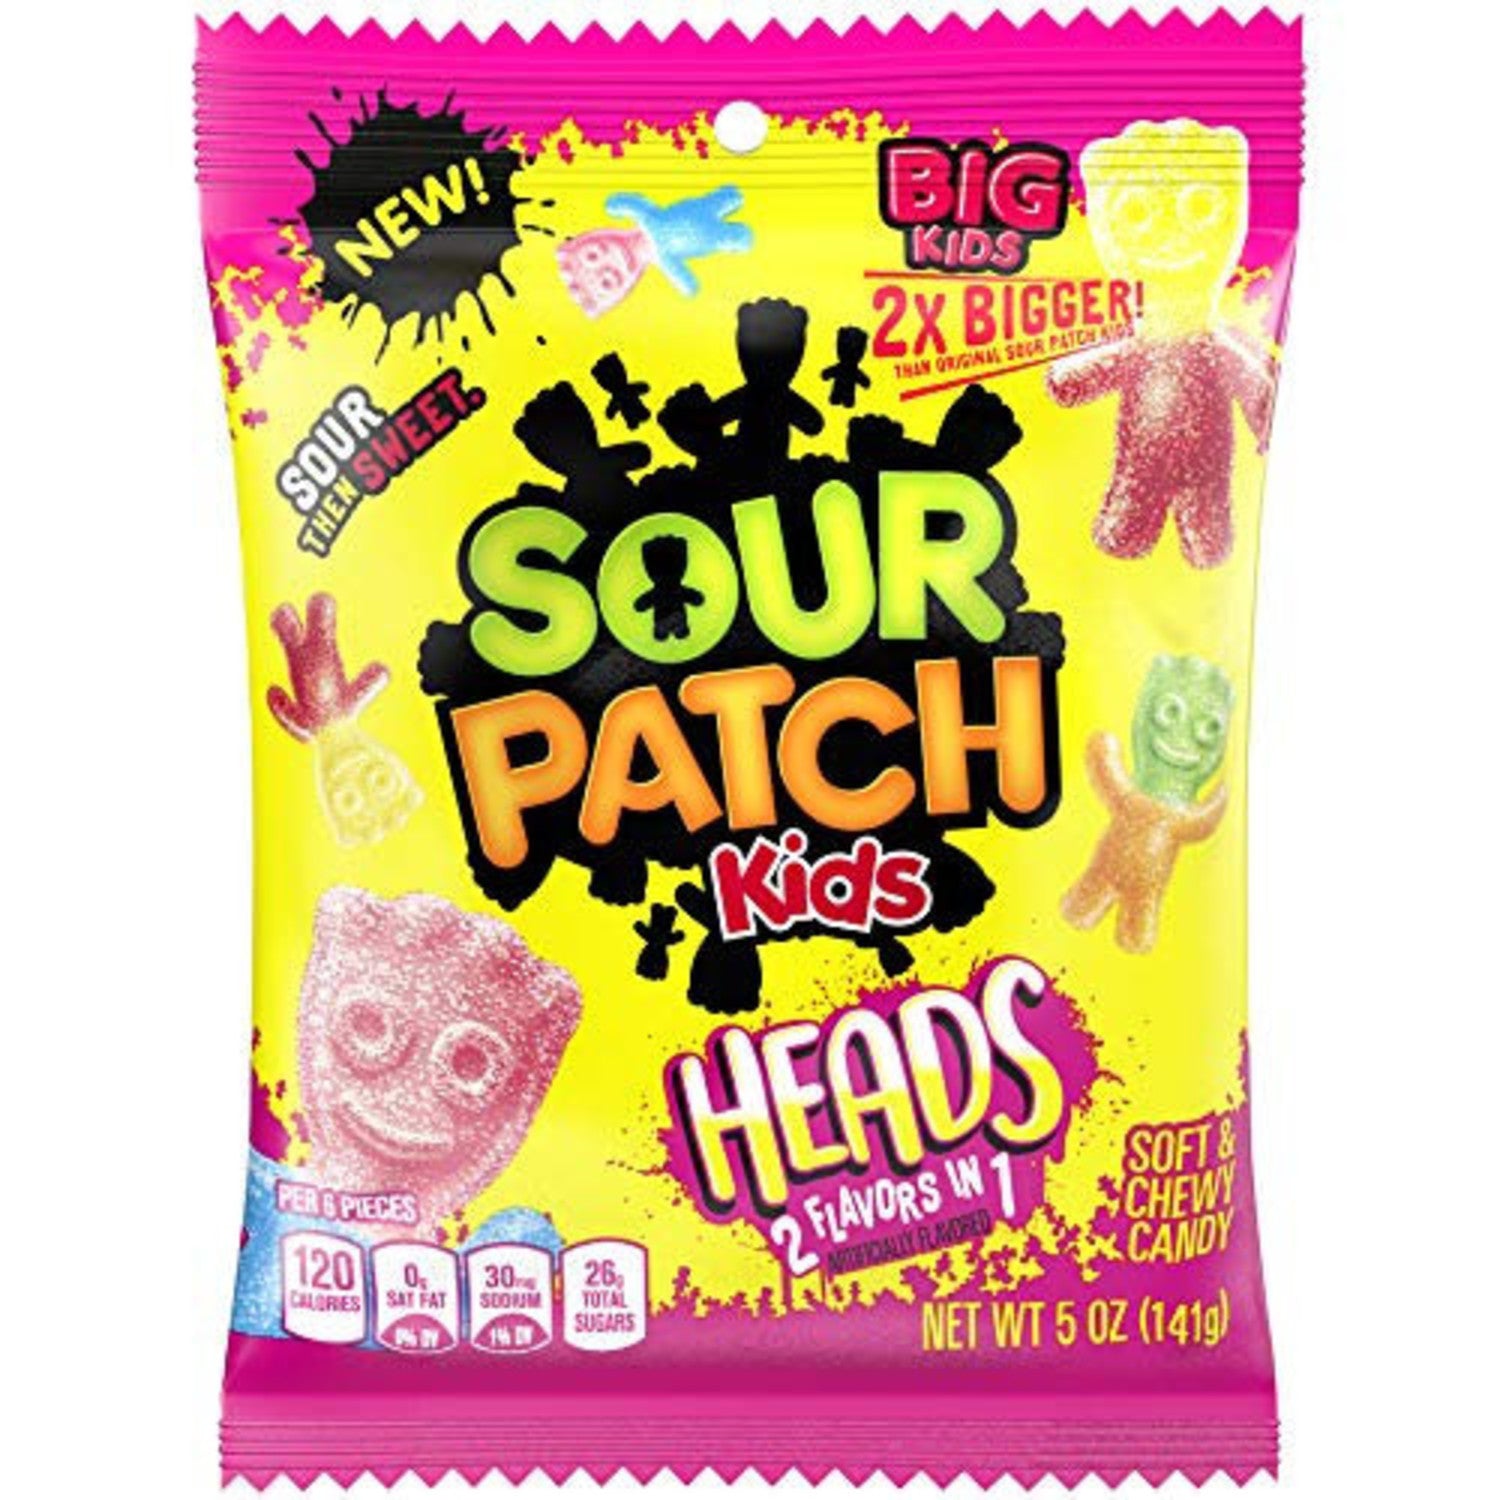 Sour Patch Kids - Heads 2 Flavors in 1